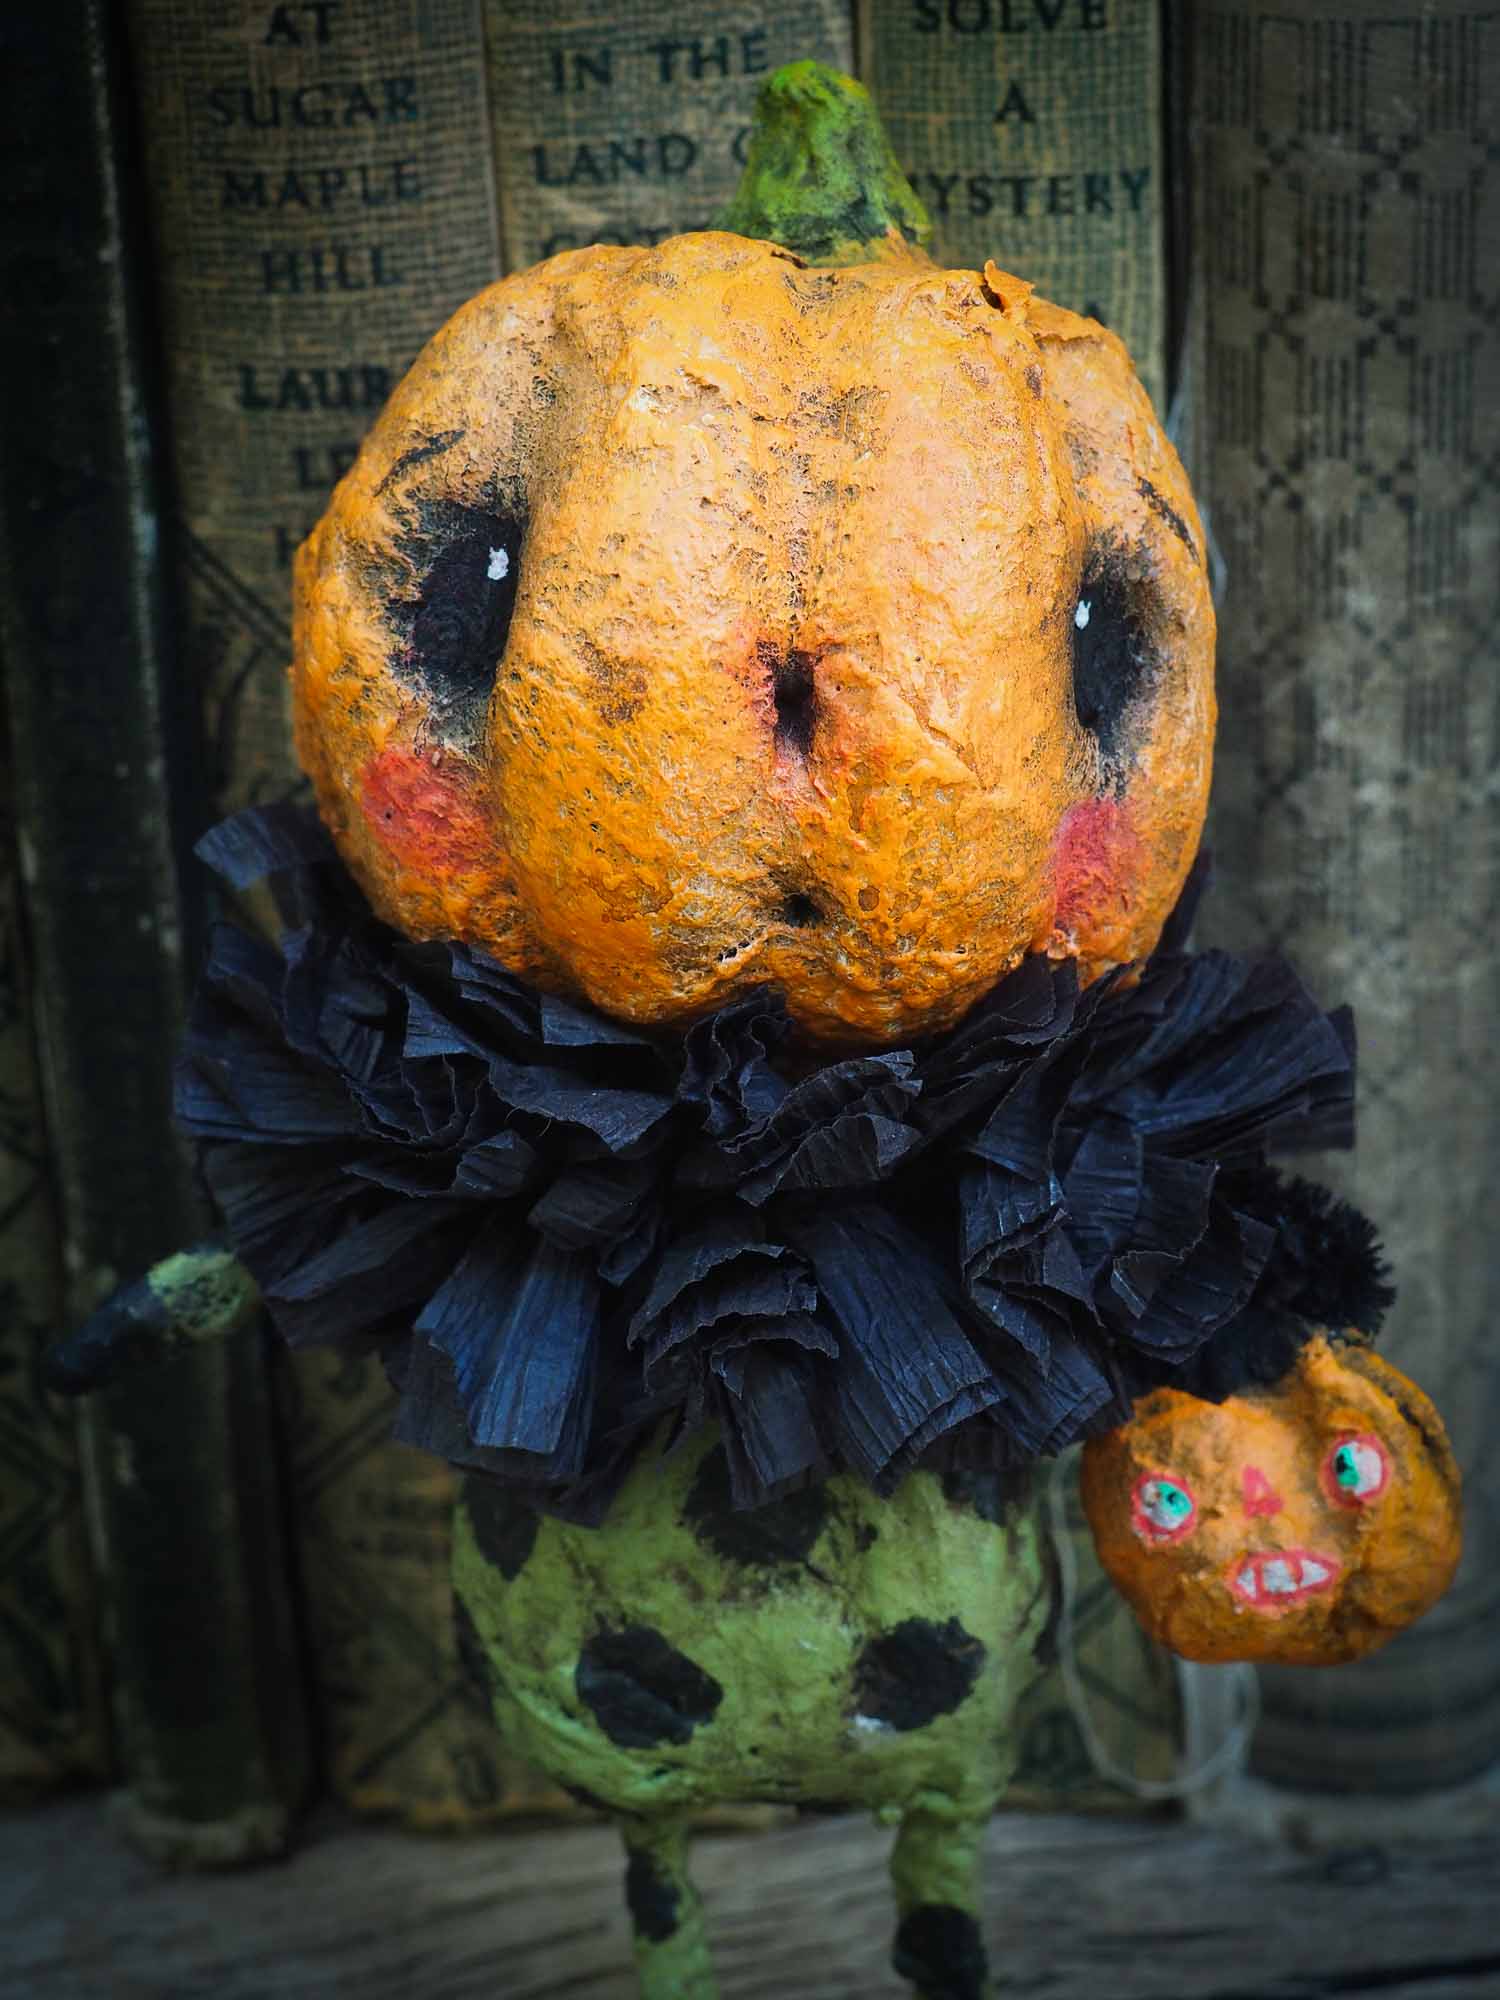 pumpkin jack-o-lantern ornament Halloween decoration. Danita art original handmade art doll pumpkin made with spun cotton from collection of witches, ghosts, skeletons, jack-o-lantern, pumpkin, vampire, ghouls and other whimsical folk art style home decor.